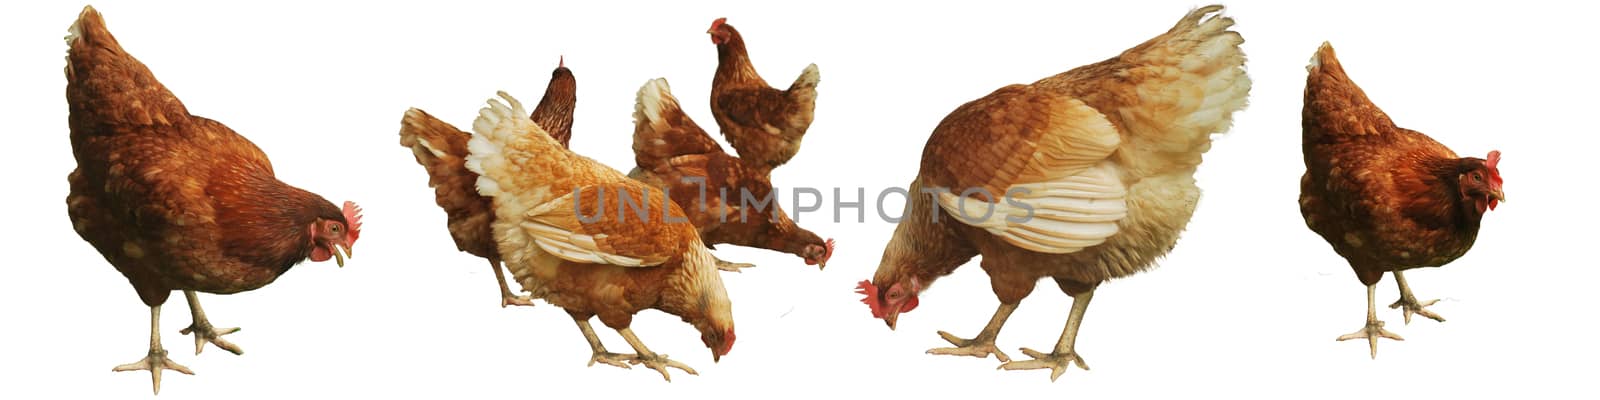 Breed chickens for eggs. by thitimontoyai